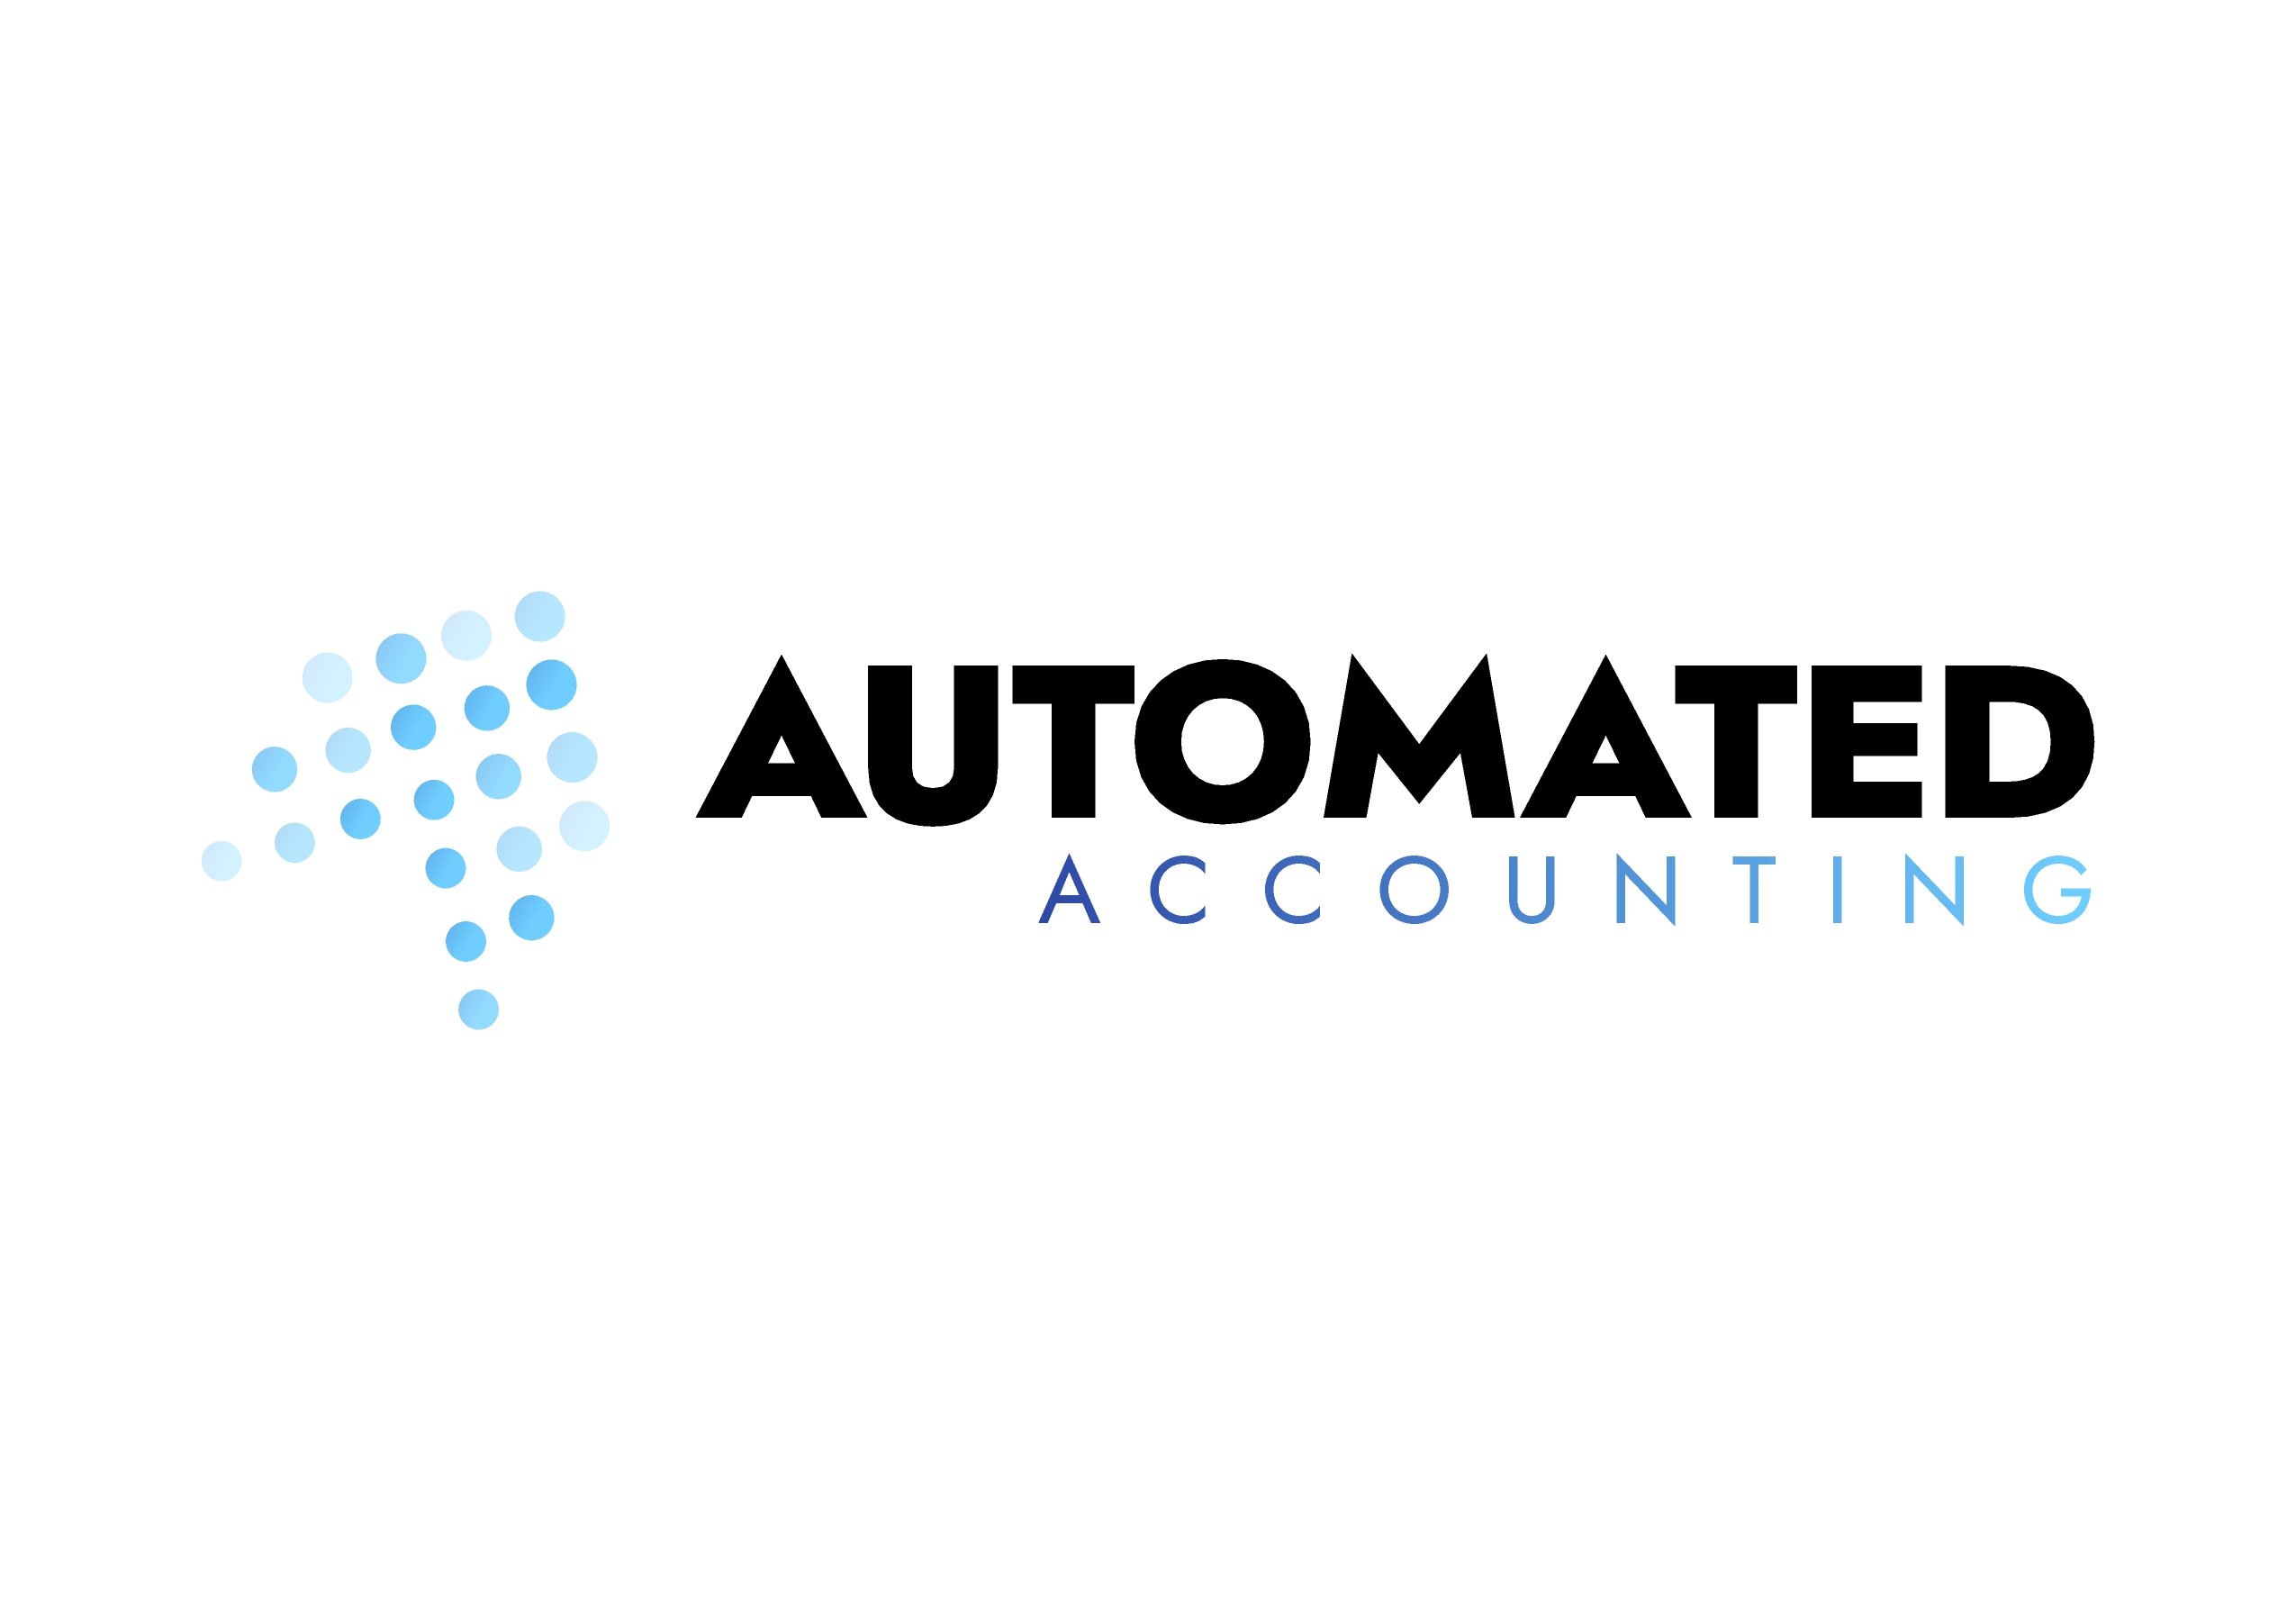 Automated Accounting